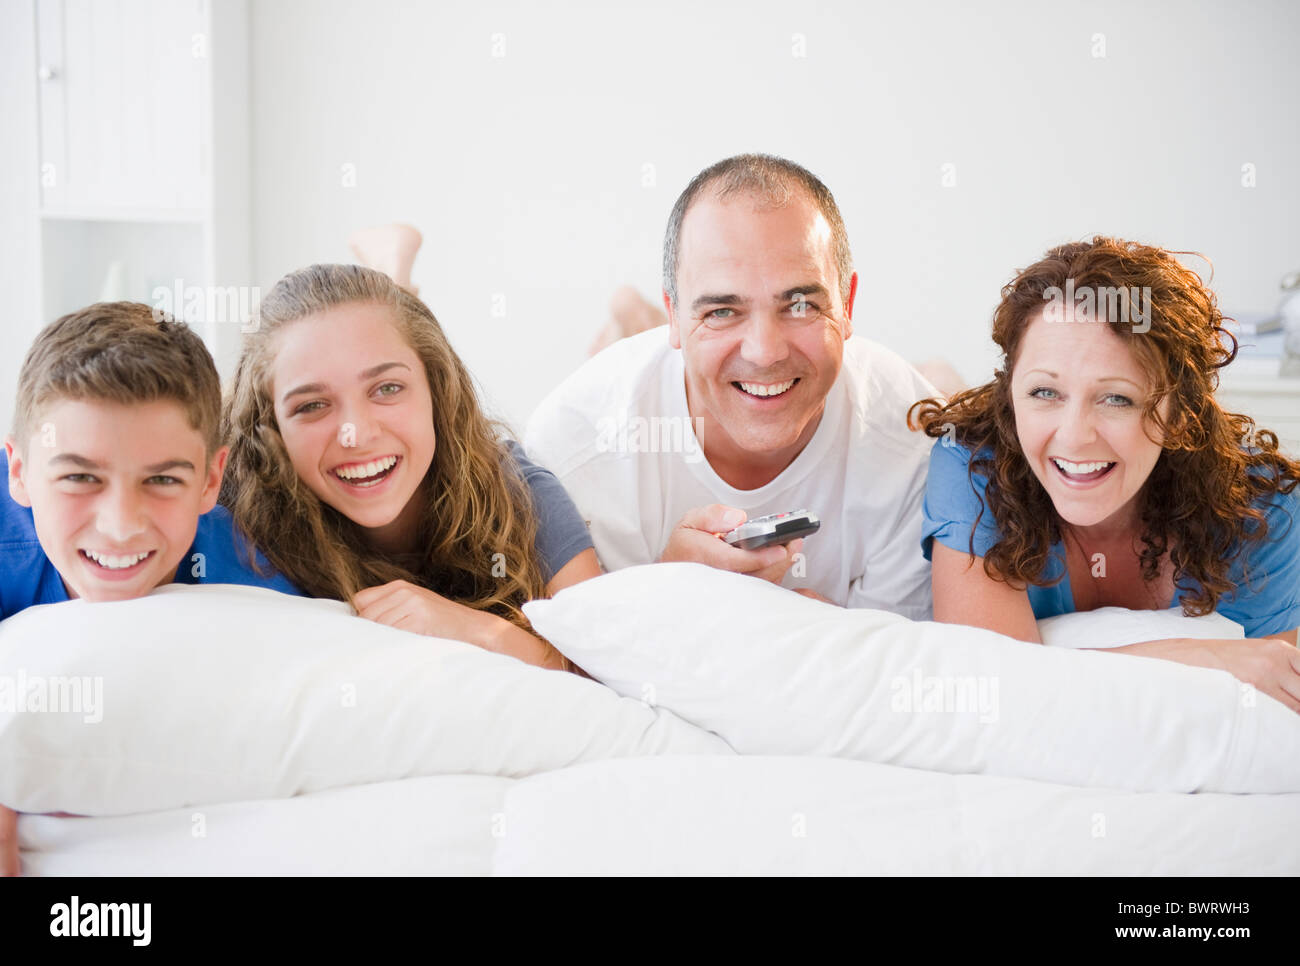 Laughing Hispanic family laying on bed together Stock Photo